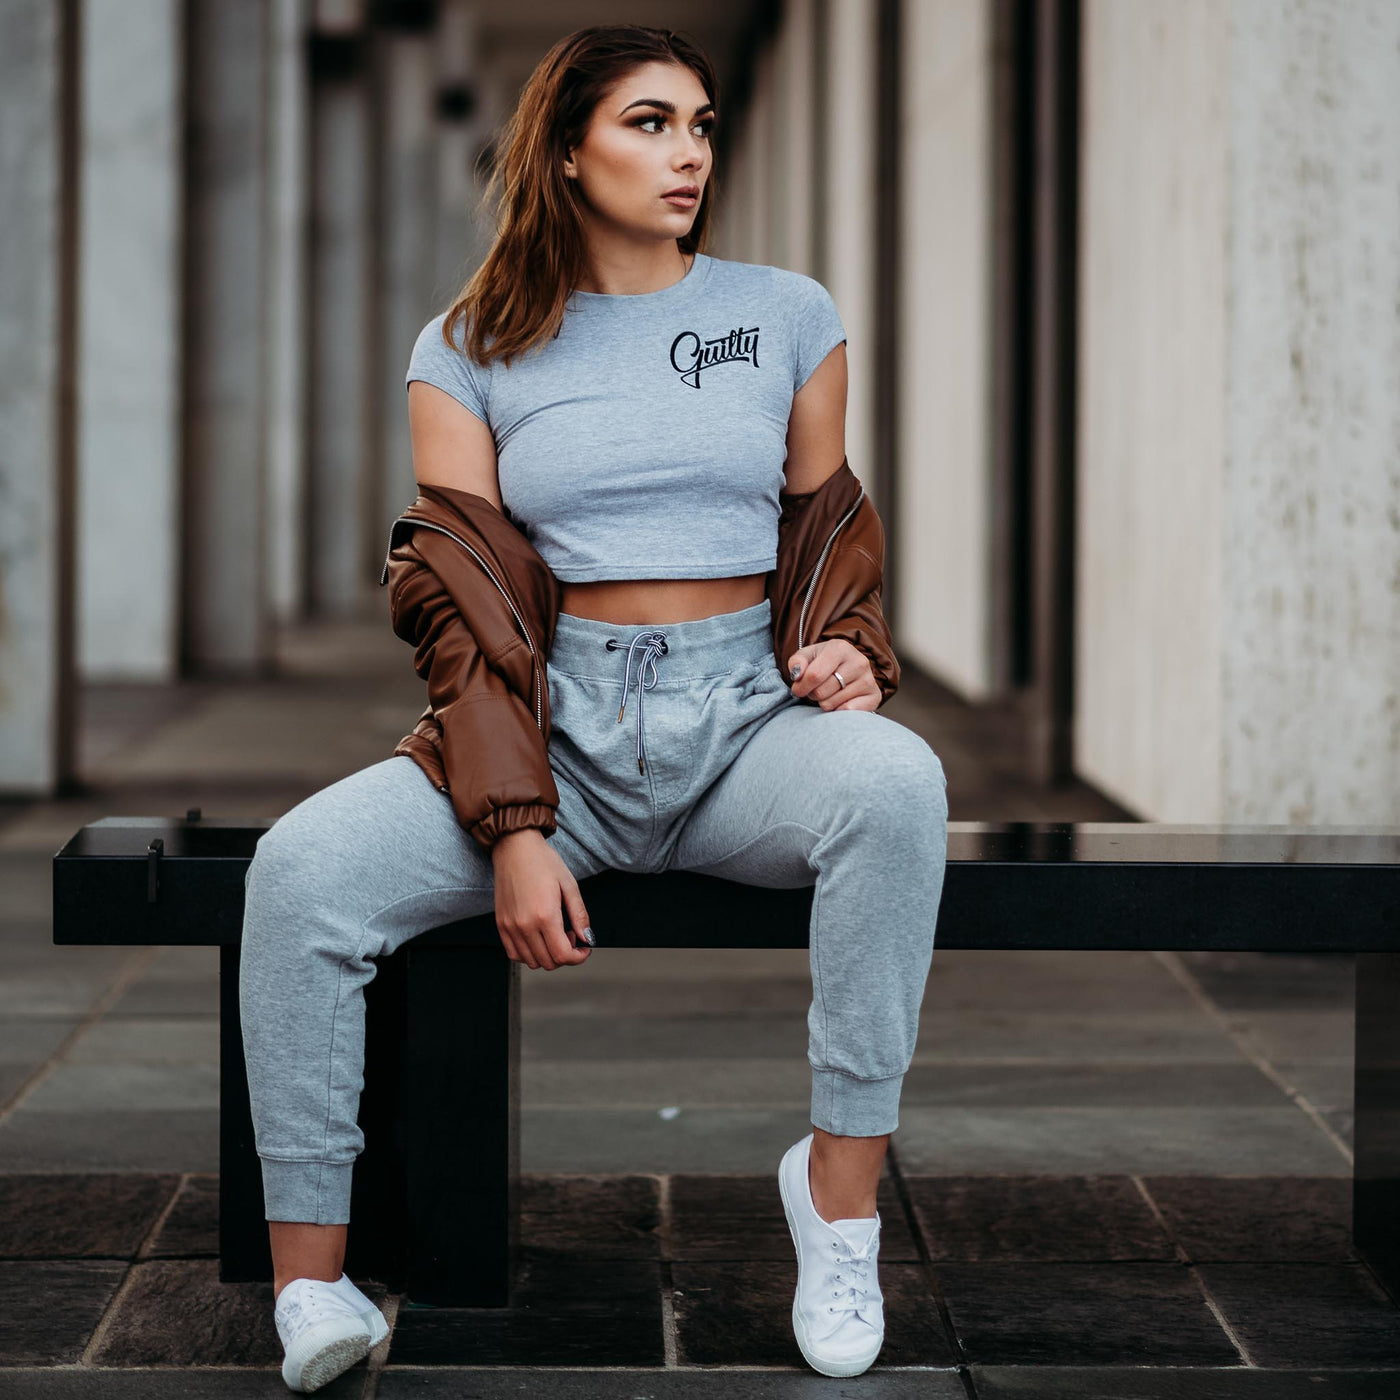 Guilty Apparel Crop Tee Grey - Casual and comfortable grey crop top with a black Guilty Apparel logo printed on it.